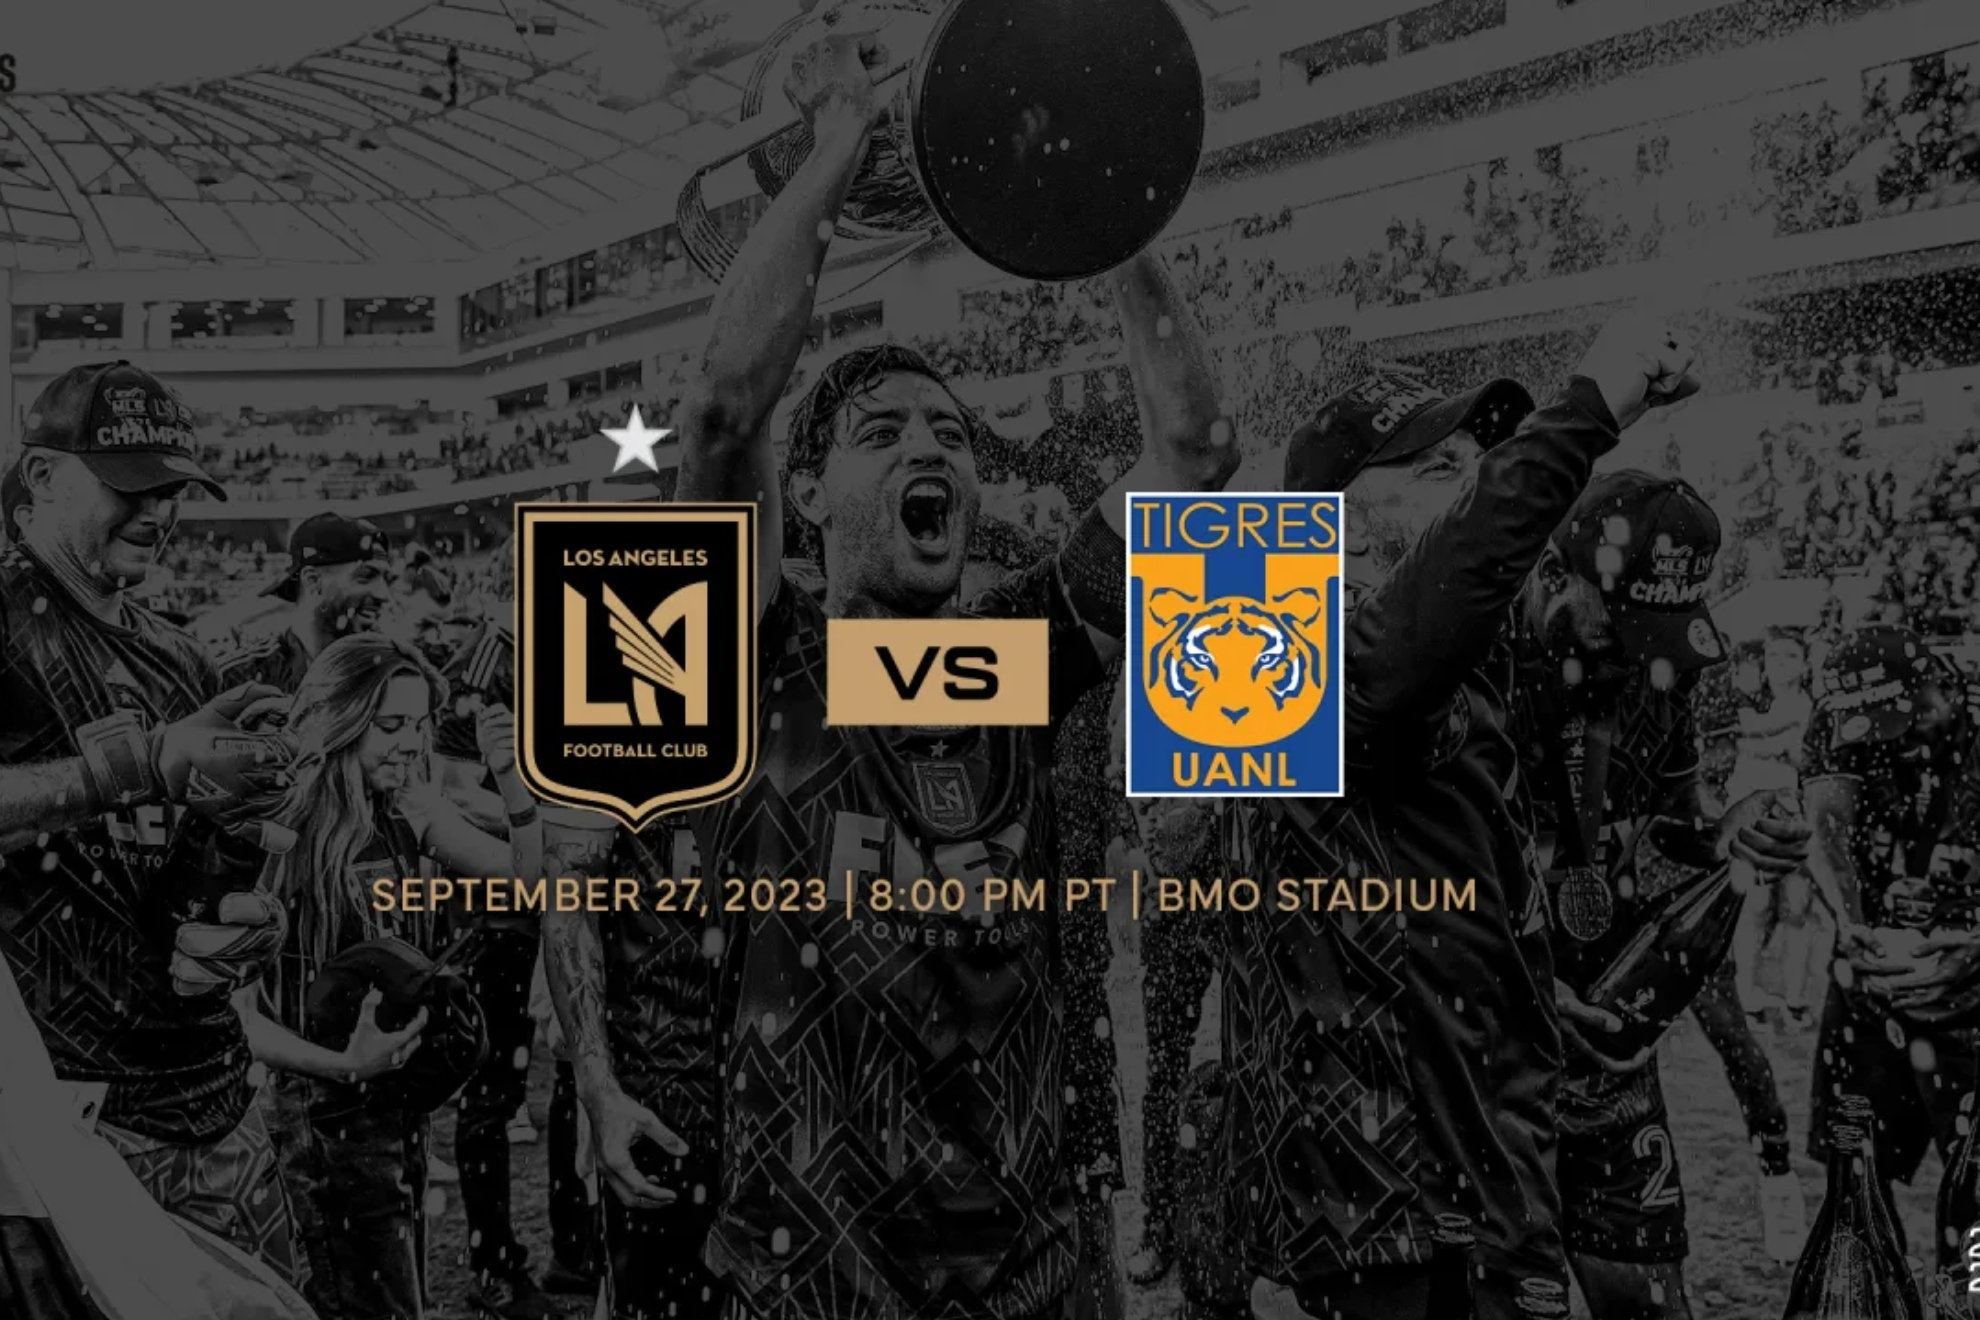 MLS announces Campeones Cup date between Tigres vs LAFC, Can Los Angeles continue the winning tradition?